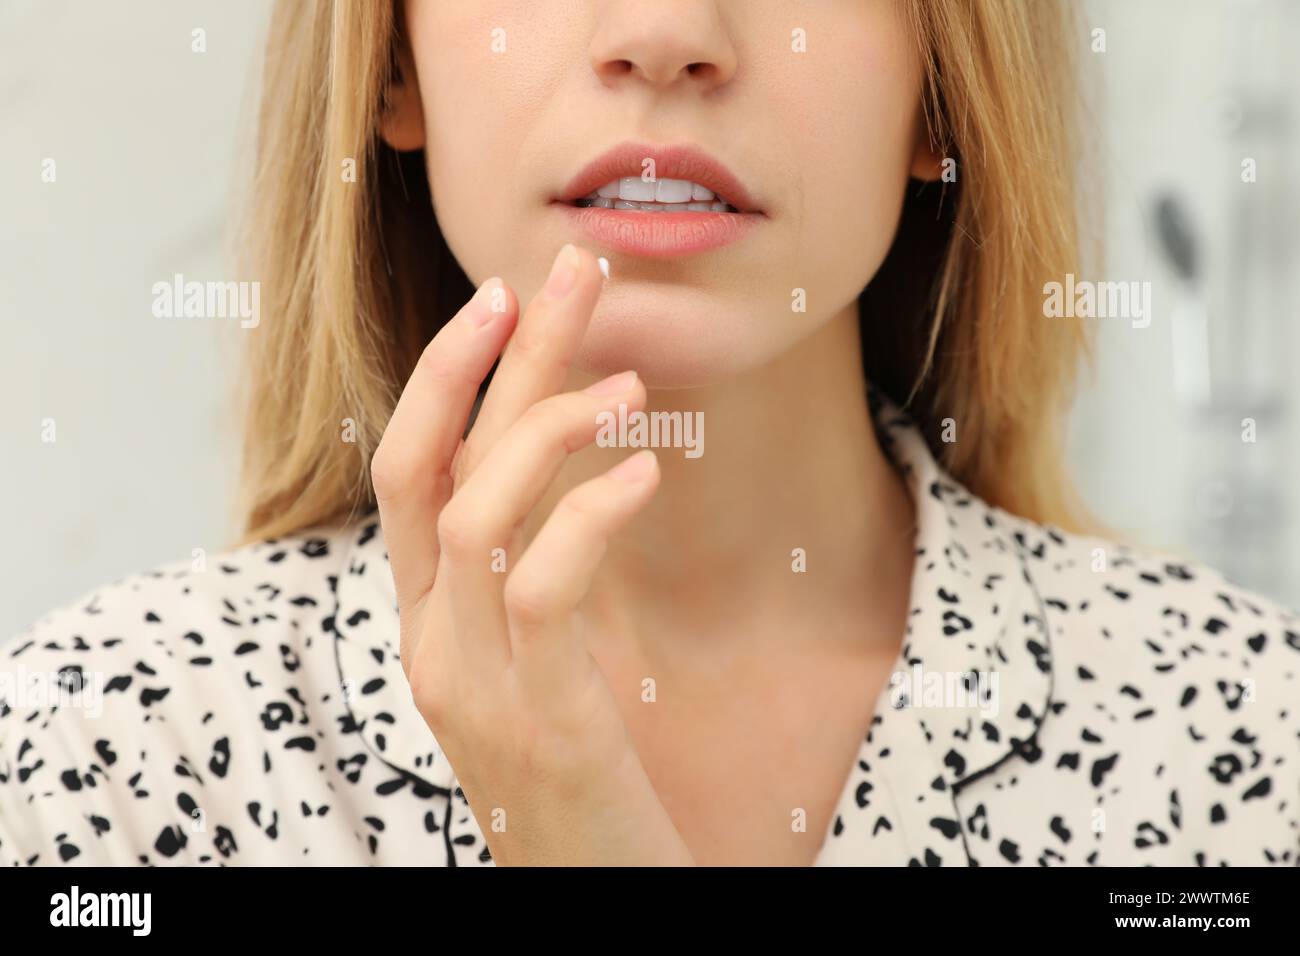 Woman with herpes applying cream onto lip against blurred background, closeup Stock Photo